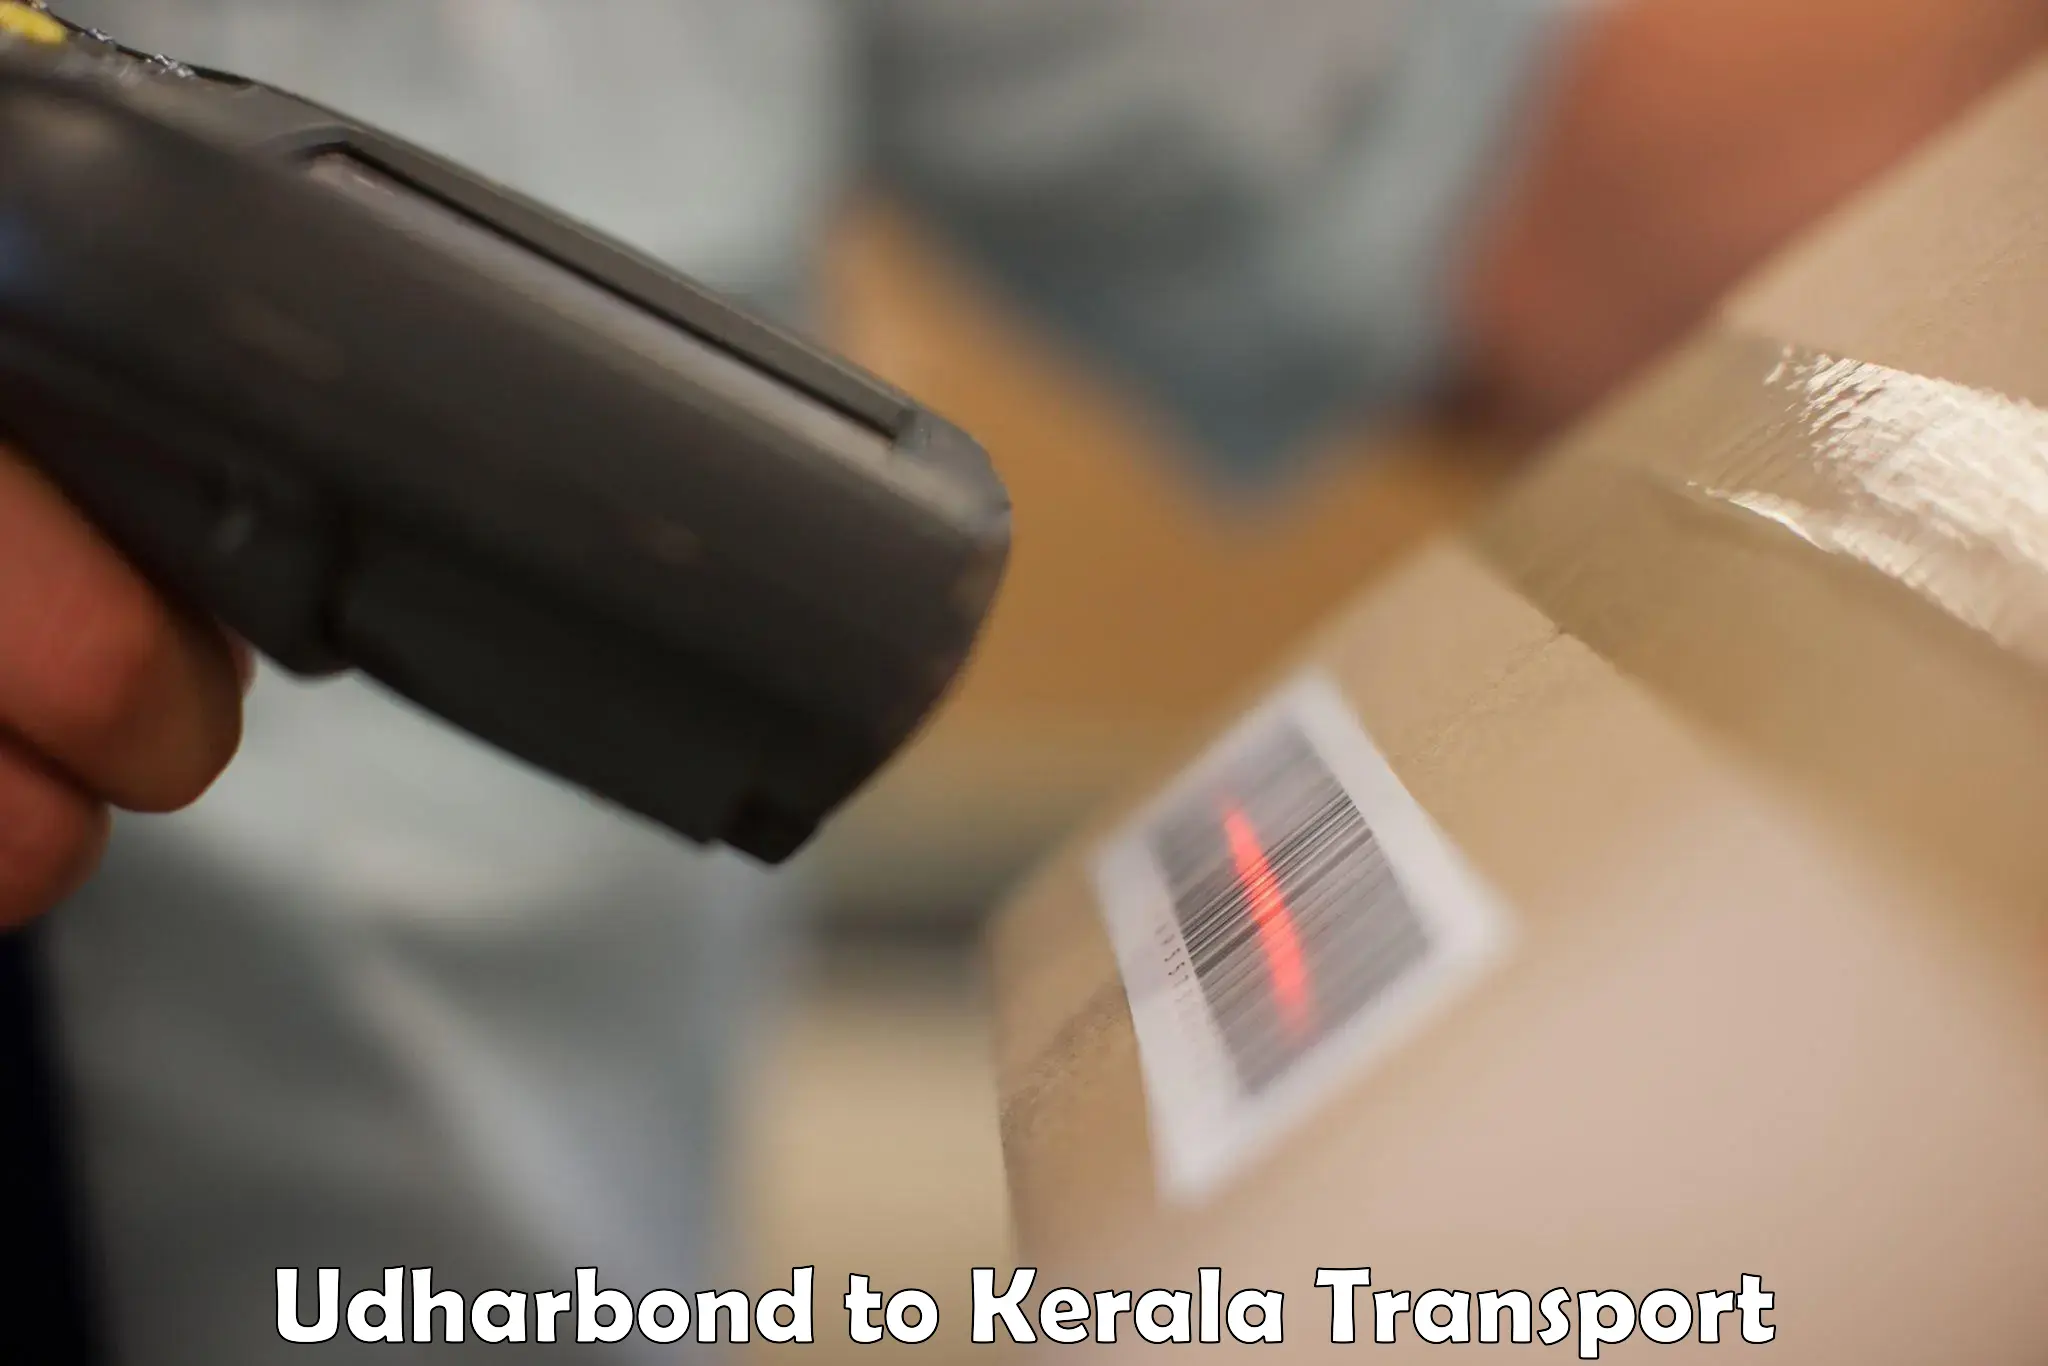 Daily transport service Udharbond to Thrissur